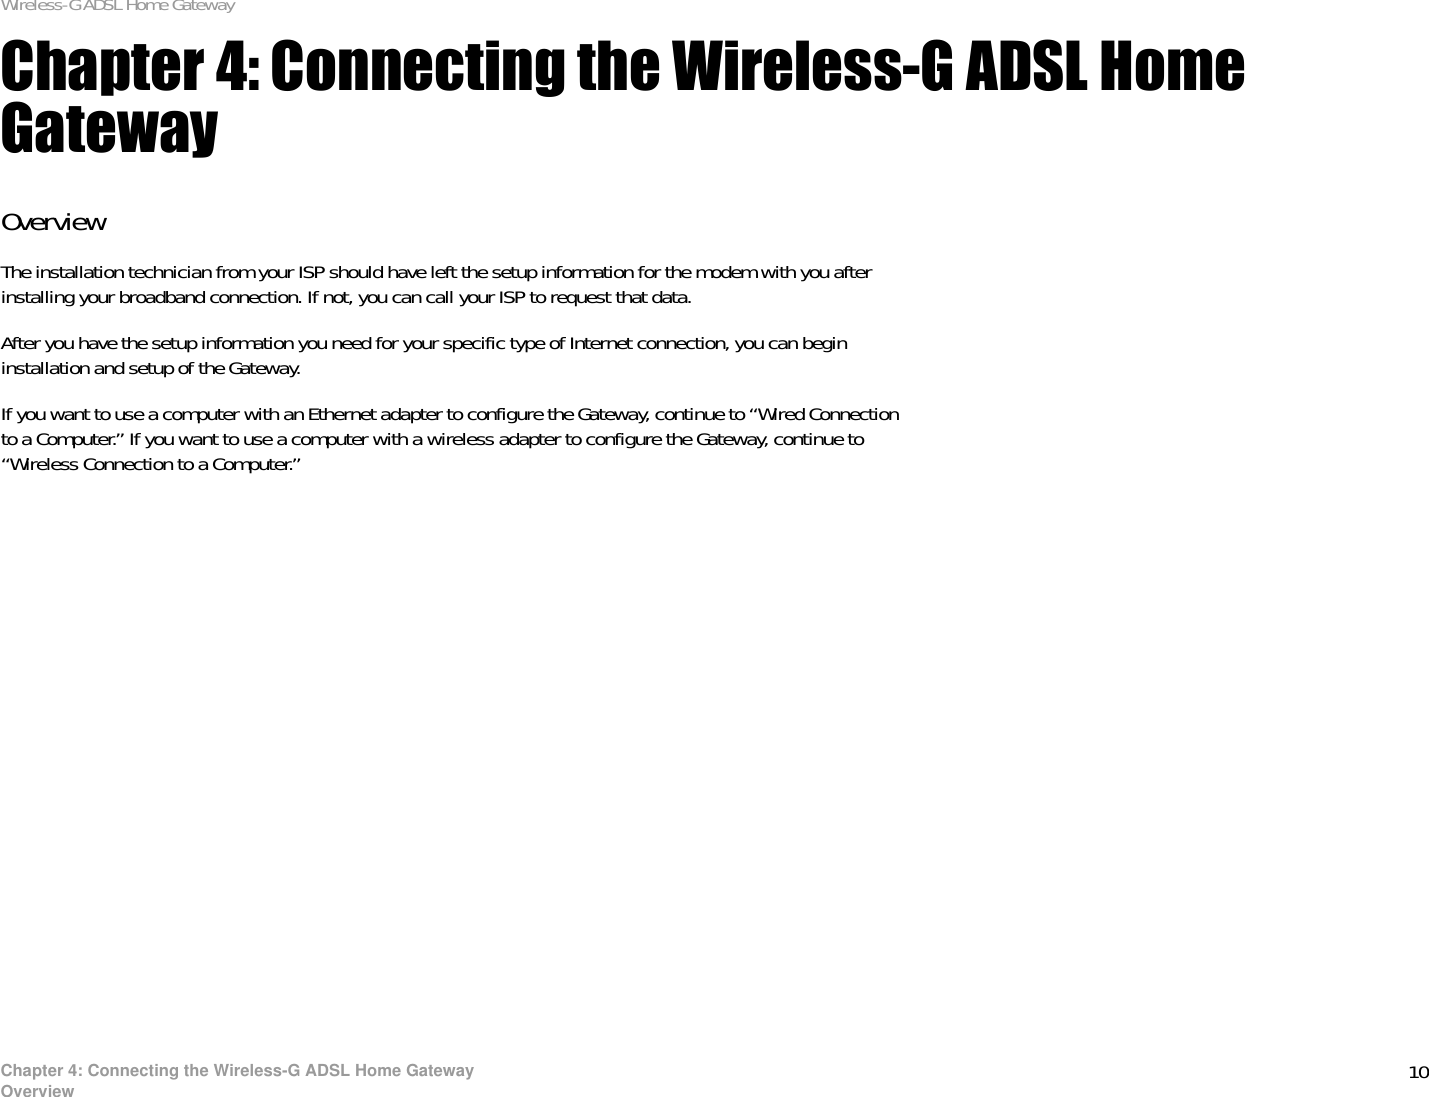 10Chapter 4: Connecting the Wireless-G ADSL Home GatewayOverviewWireless-G ADSL Home GatewayChapter 4: Connecting the Wireless-G ADSL Home GatewayOverviewThe installation technician from your ISP should have left the setup information for the modem with you after installing your broadband connection. If not, you can call your ISP to request that data. After you have the setup information you need for your specific type of Internet connection, you can begin installation and setup of the Gateway.If you want to use a computer with an Ethernet adapter to configure the Gateway, continue to “Wired Connection to a Computer.” If you want to use a computer with a wireless adapter to configure the Gateway, continue to “Wireless Connection to a Computer.”